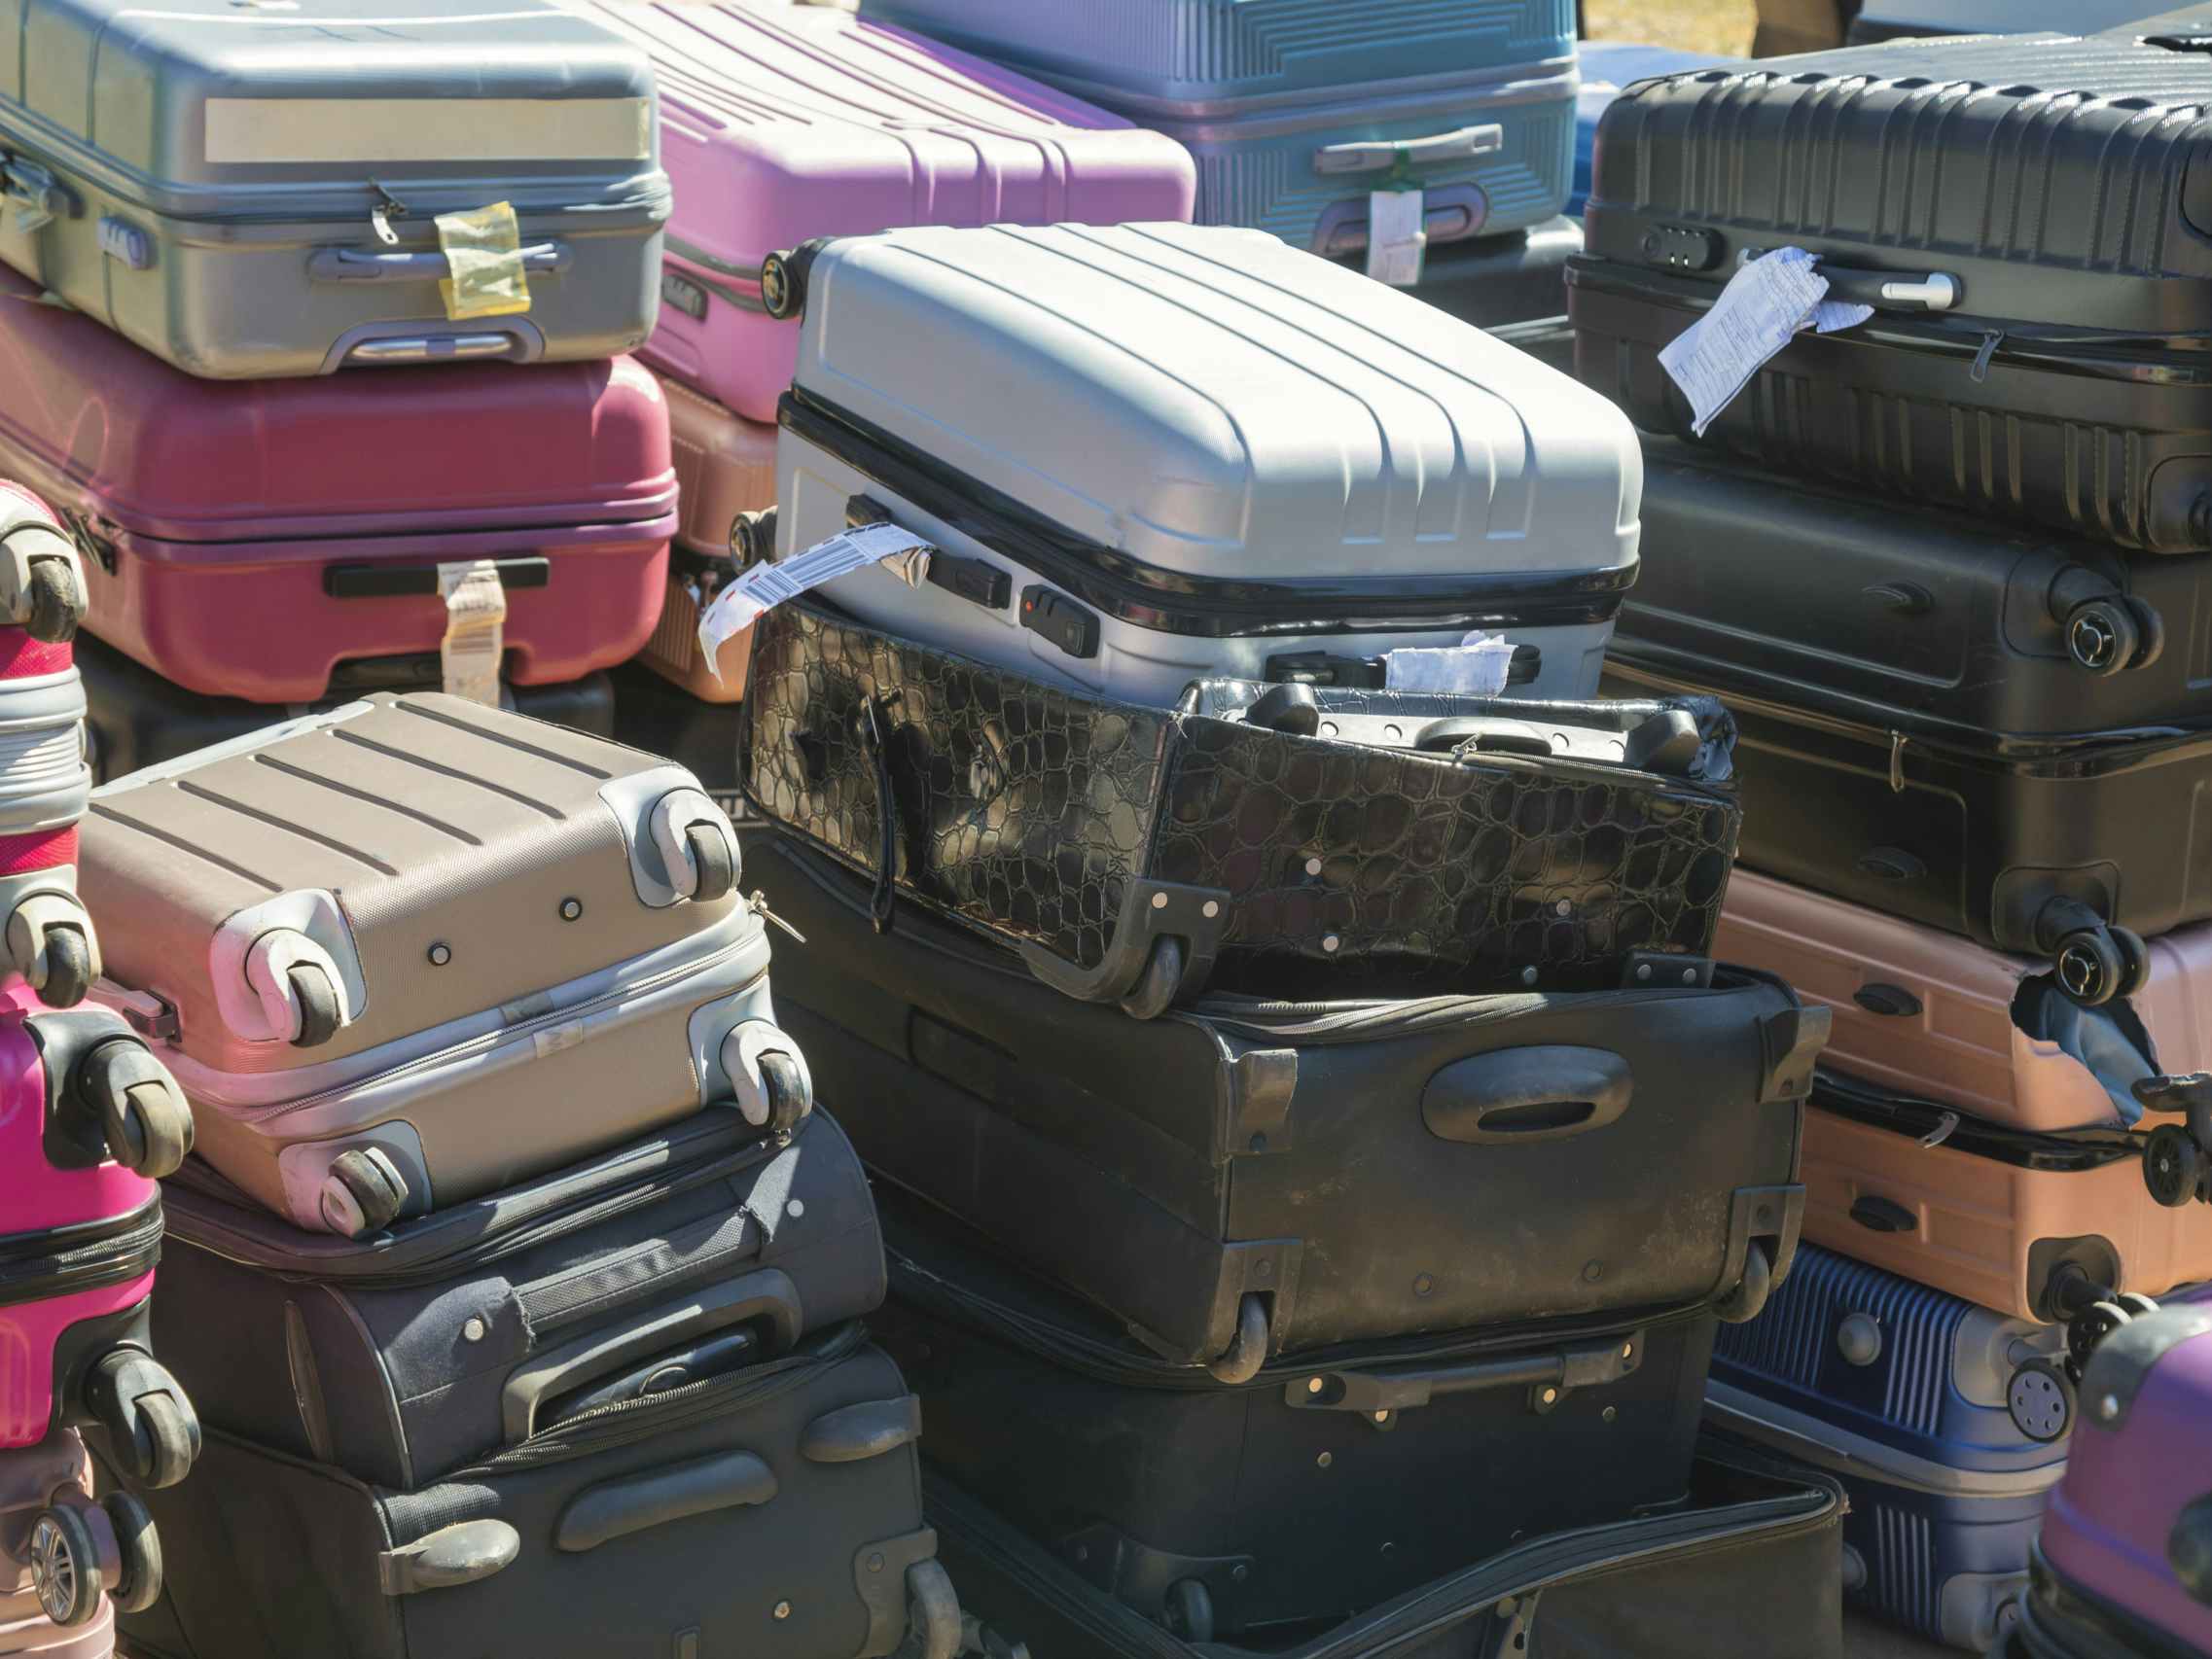 Stacks of unclaimed baggage from an airport